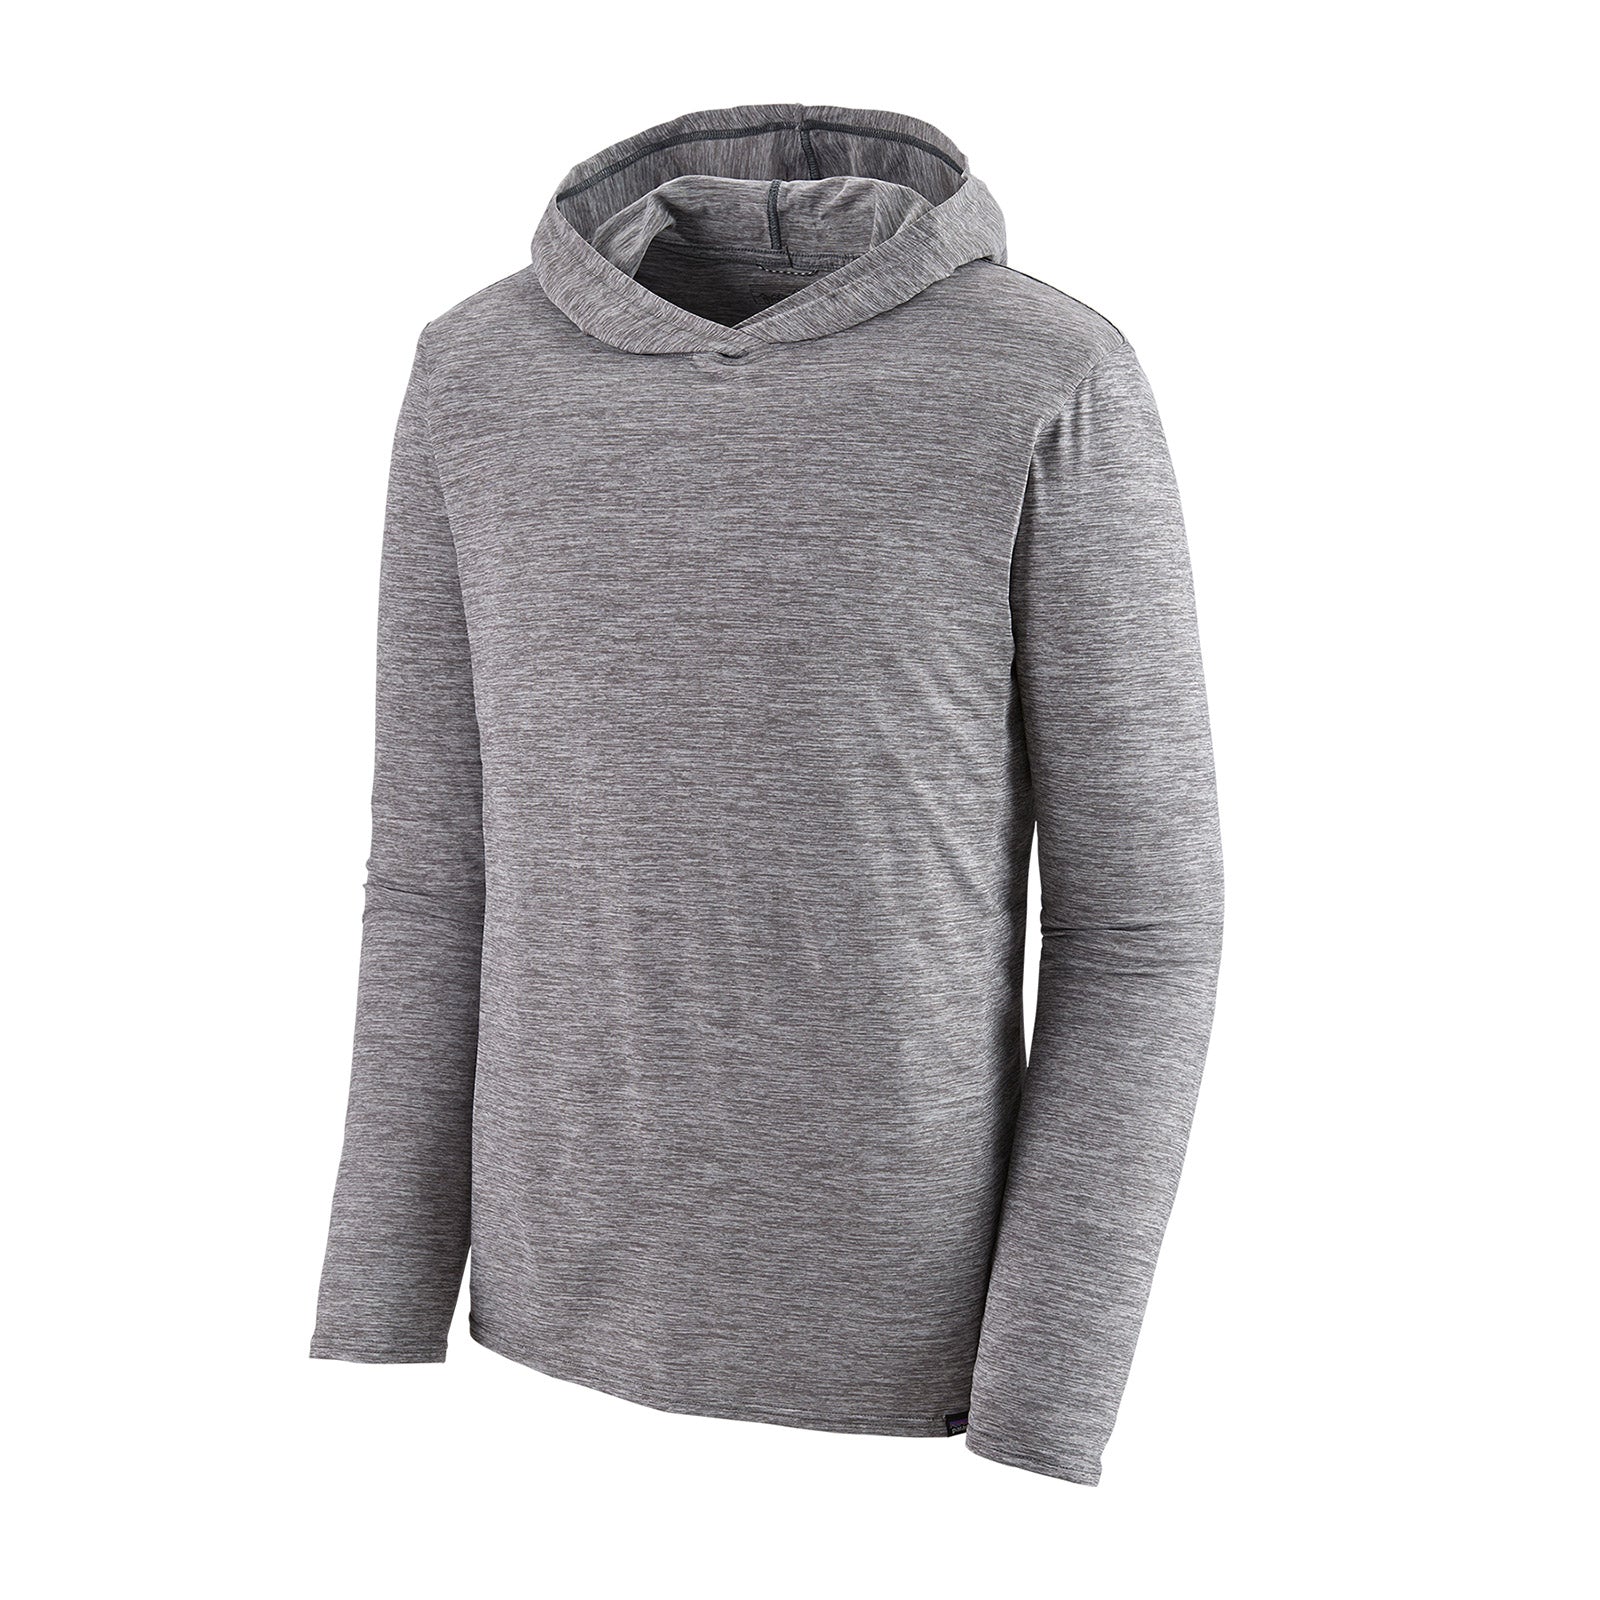 patagonia men's capilene cool daily hoody in feather grey